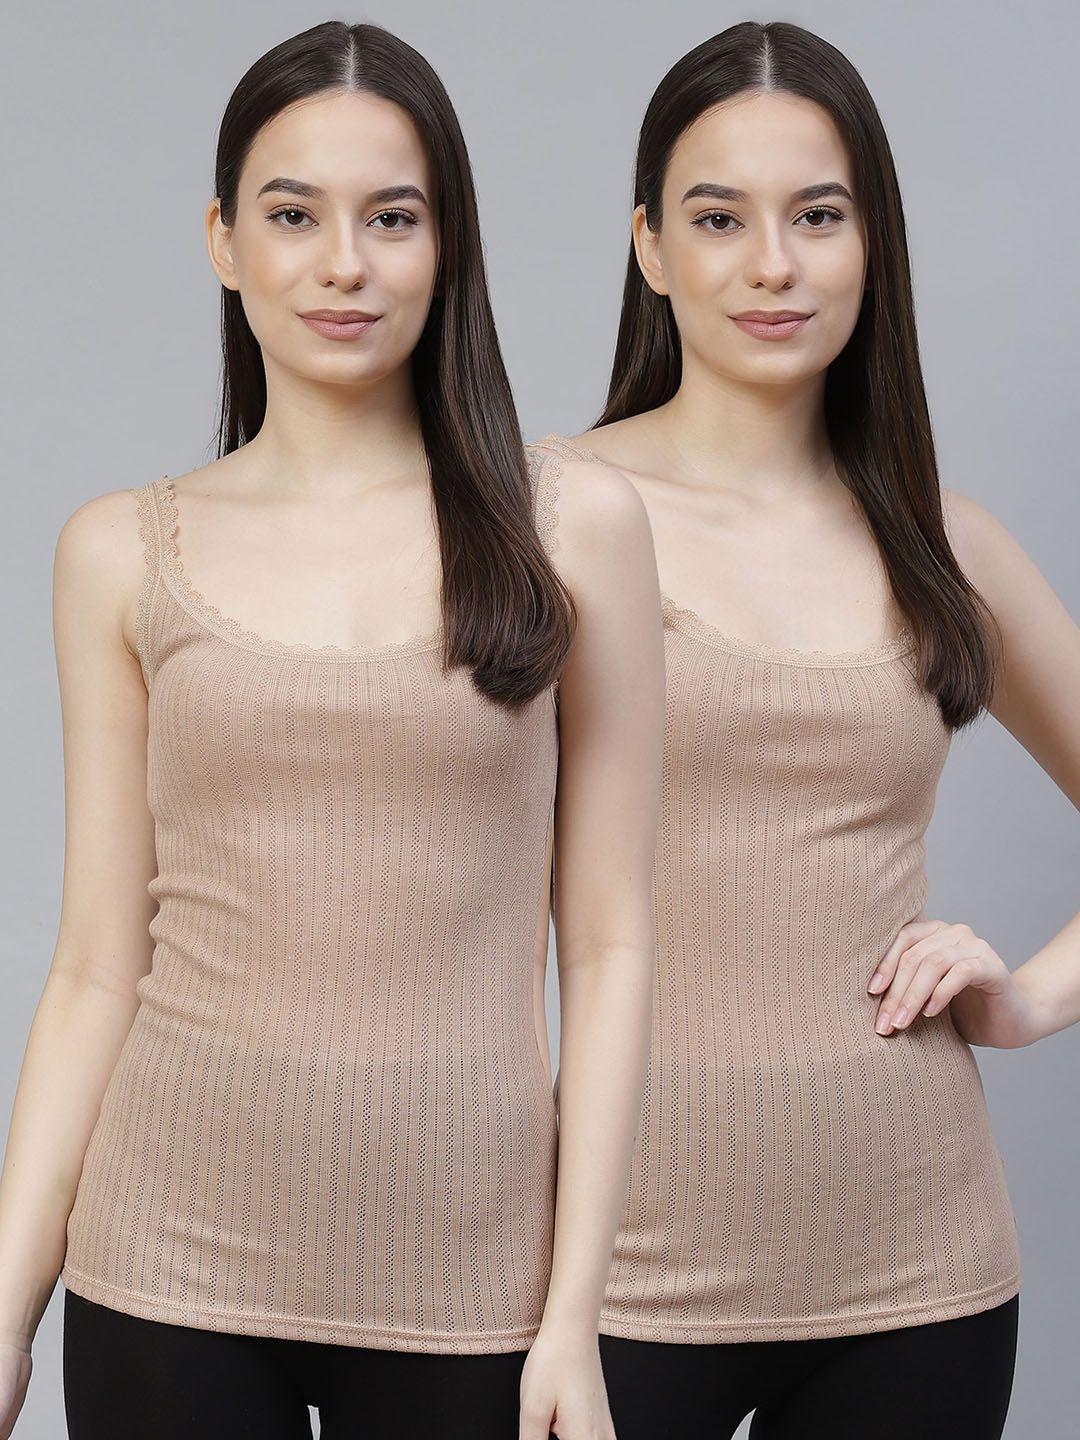 marks & spencer women pack of 2 nude solid thermal tops